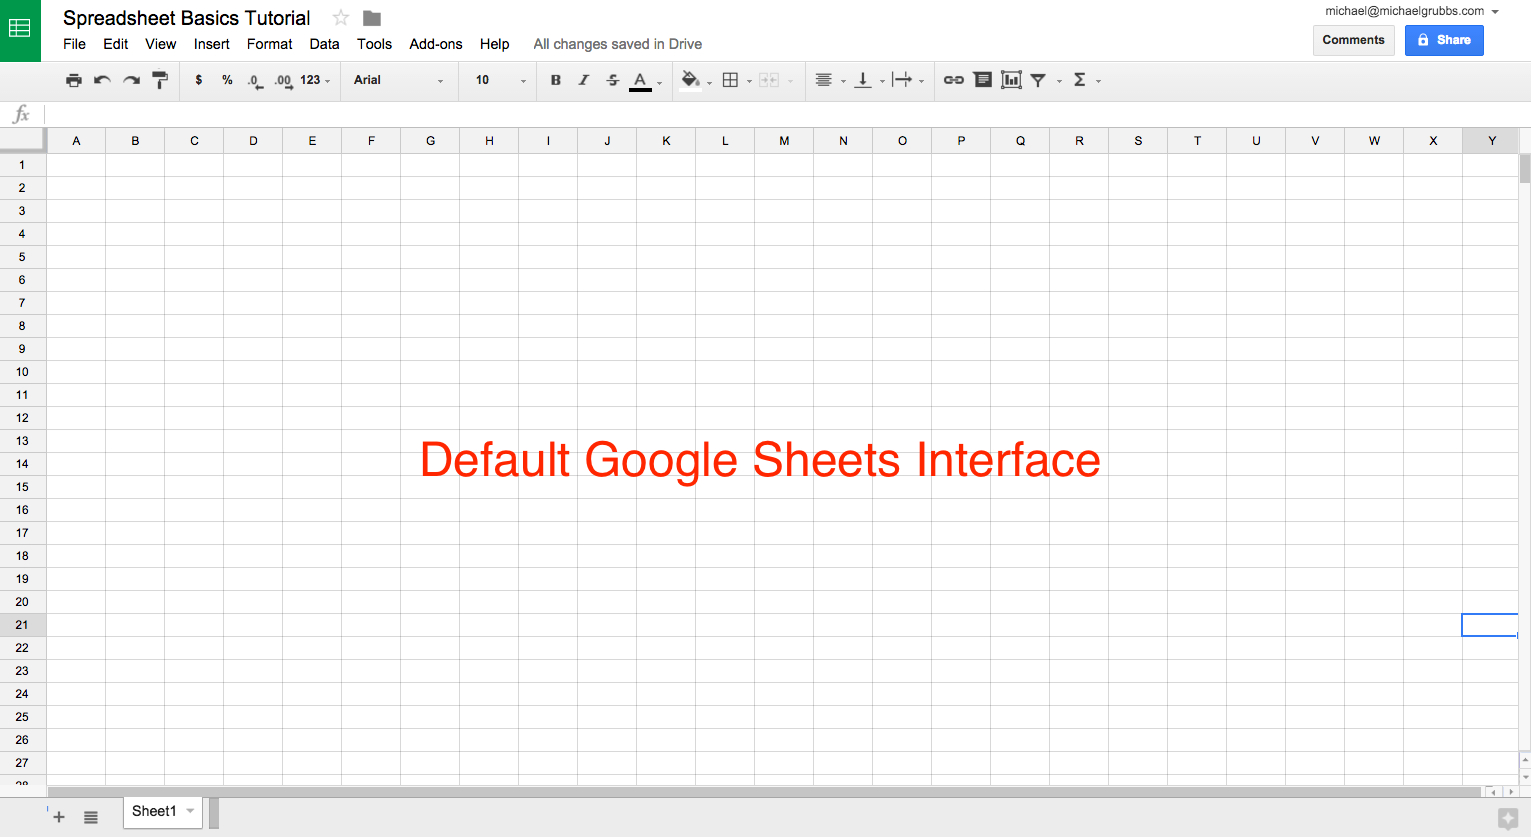 Make Your Own Spreadsheet In Google Sheets 101: The Beginner's Guide To Online Spreadsheets  The